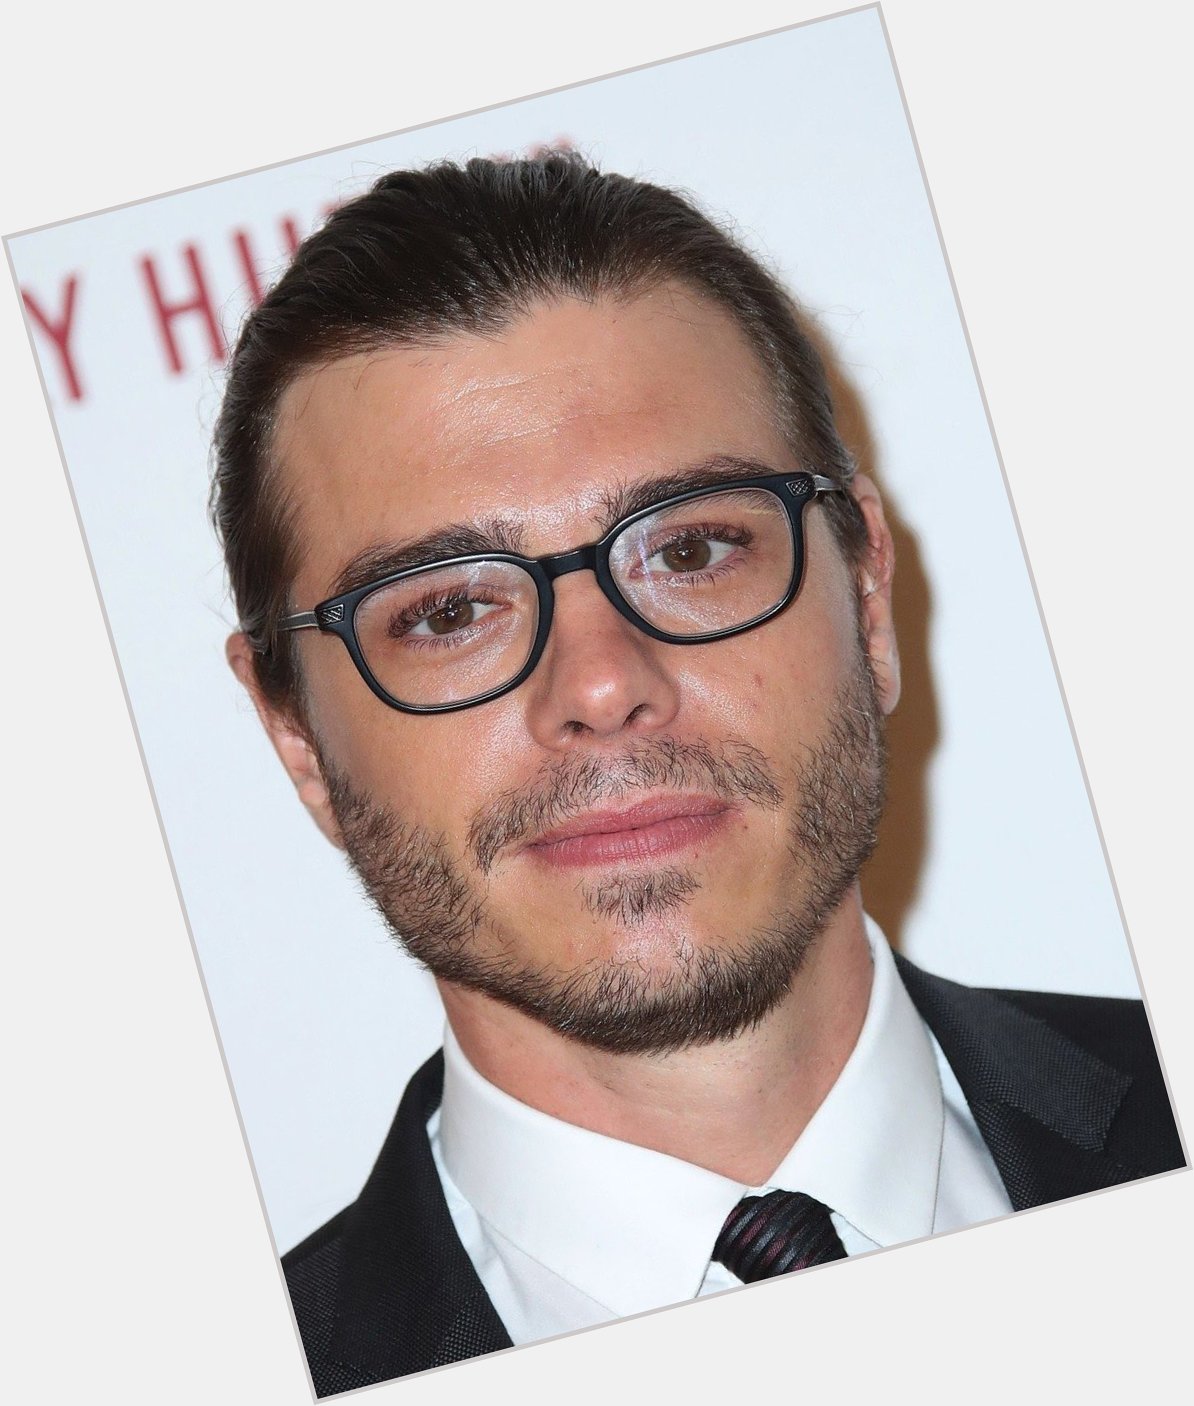 We wish actor and singer Matthew Lawrence a very happy birthday! 